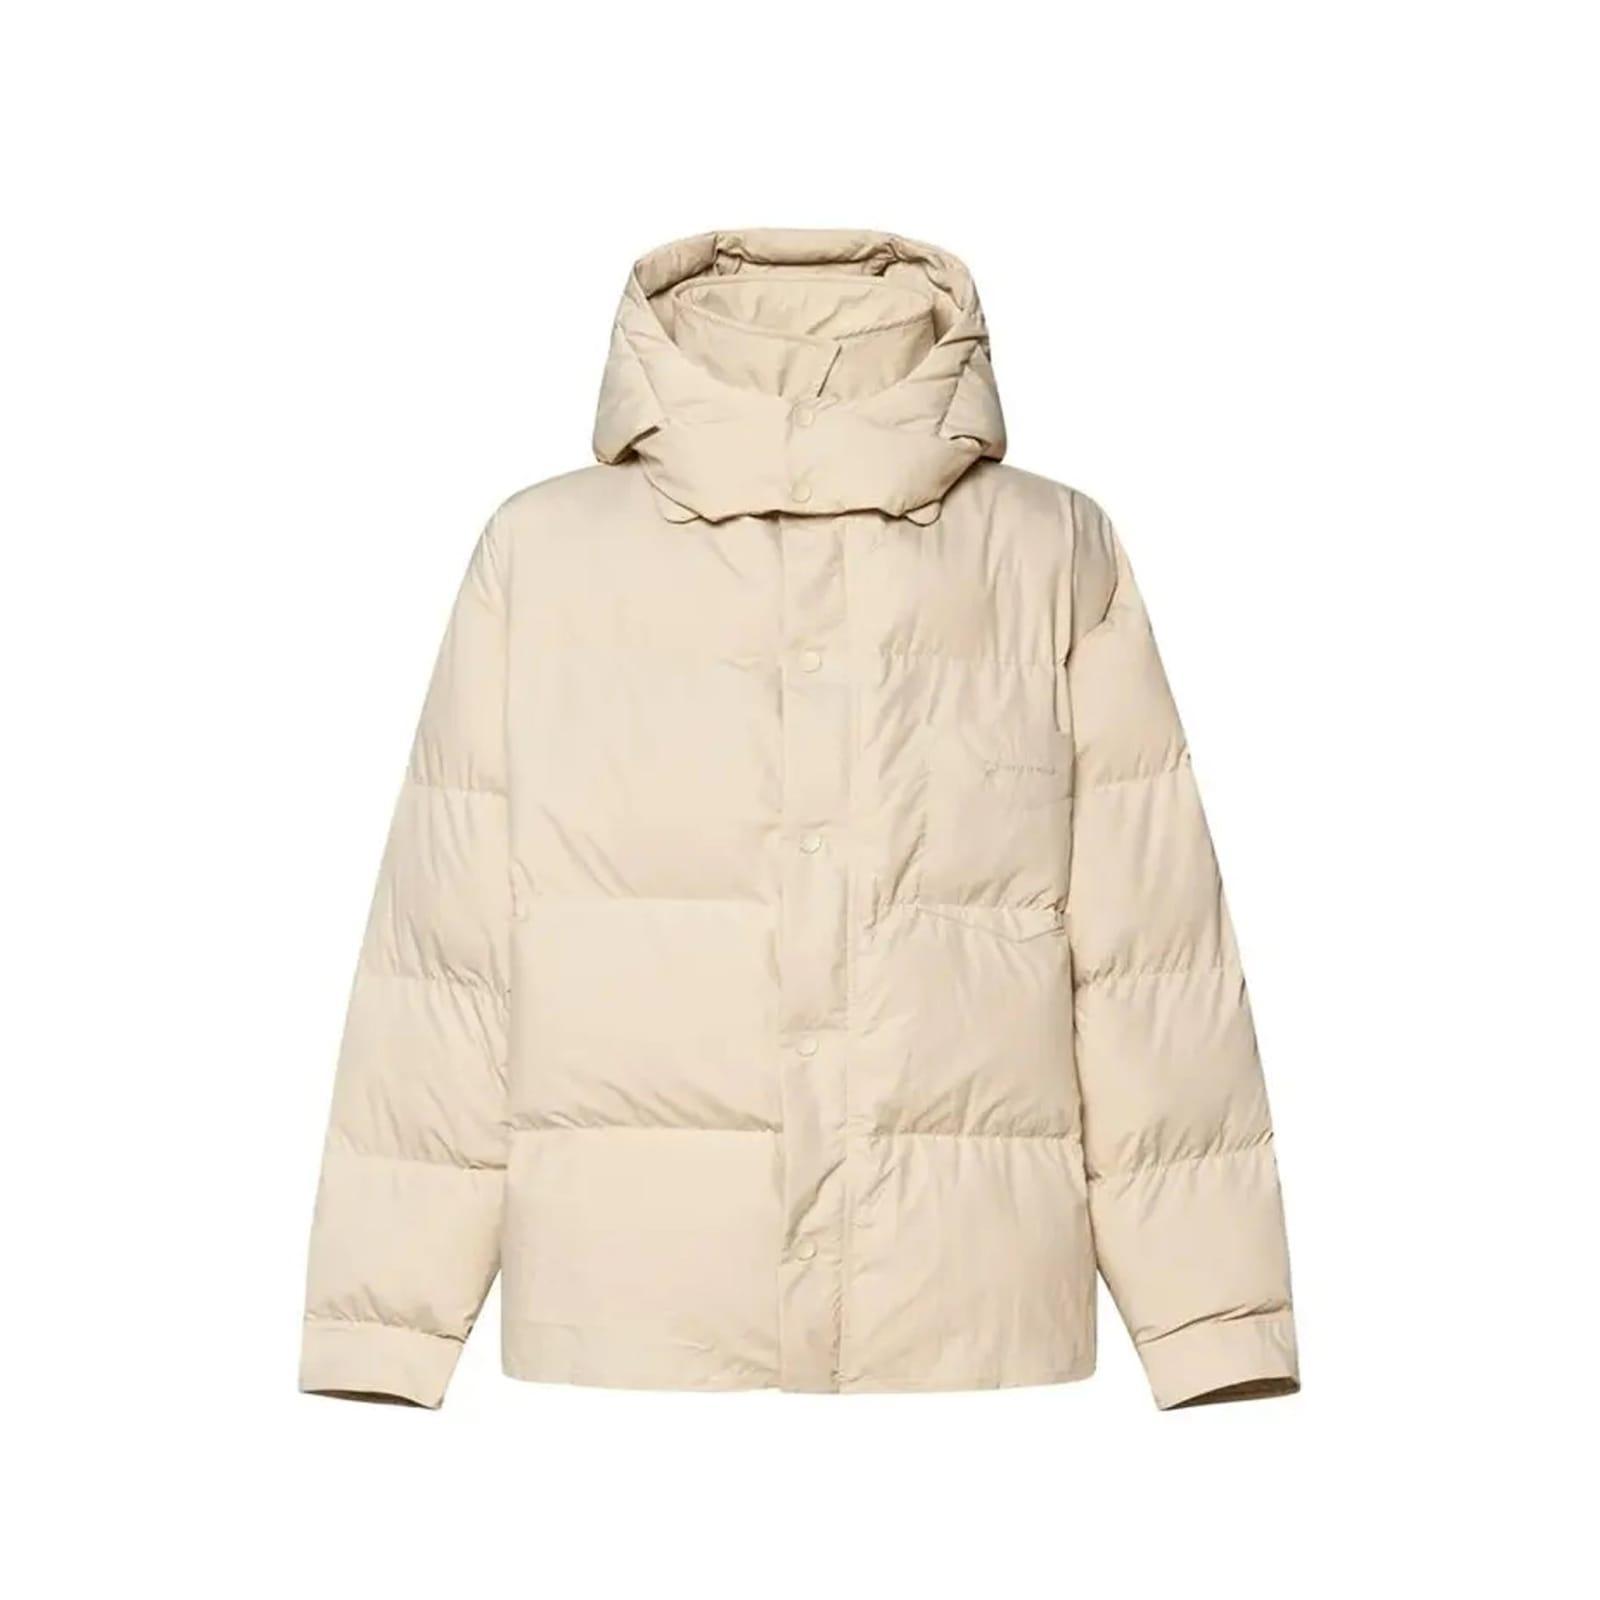 Jacquemus "doudoune" Padded Jacket in Natural for Men | Lyst